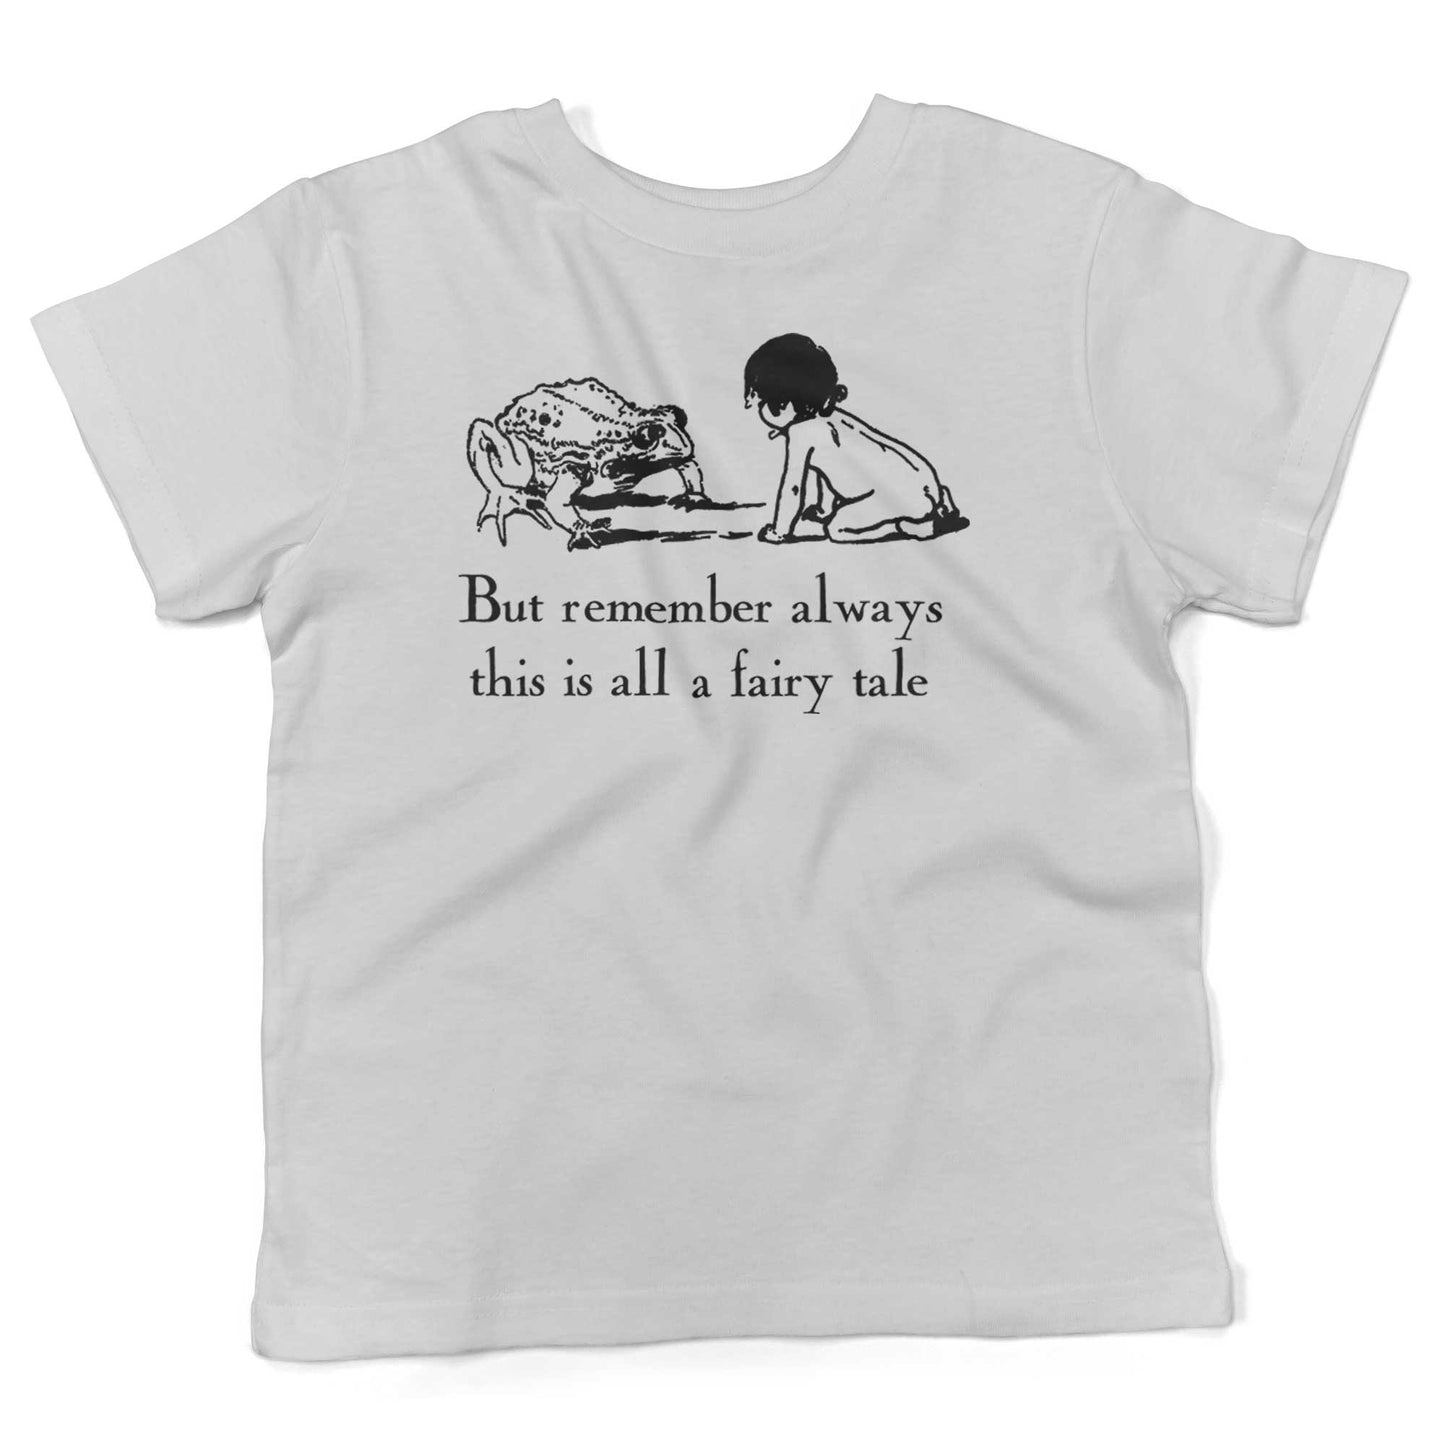 But remember always this is all a fairy tale Toddler Shirt-White-2T